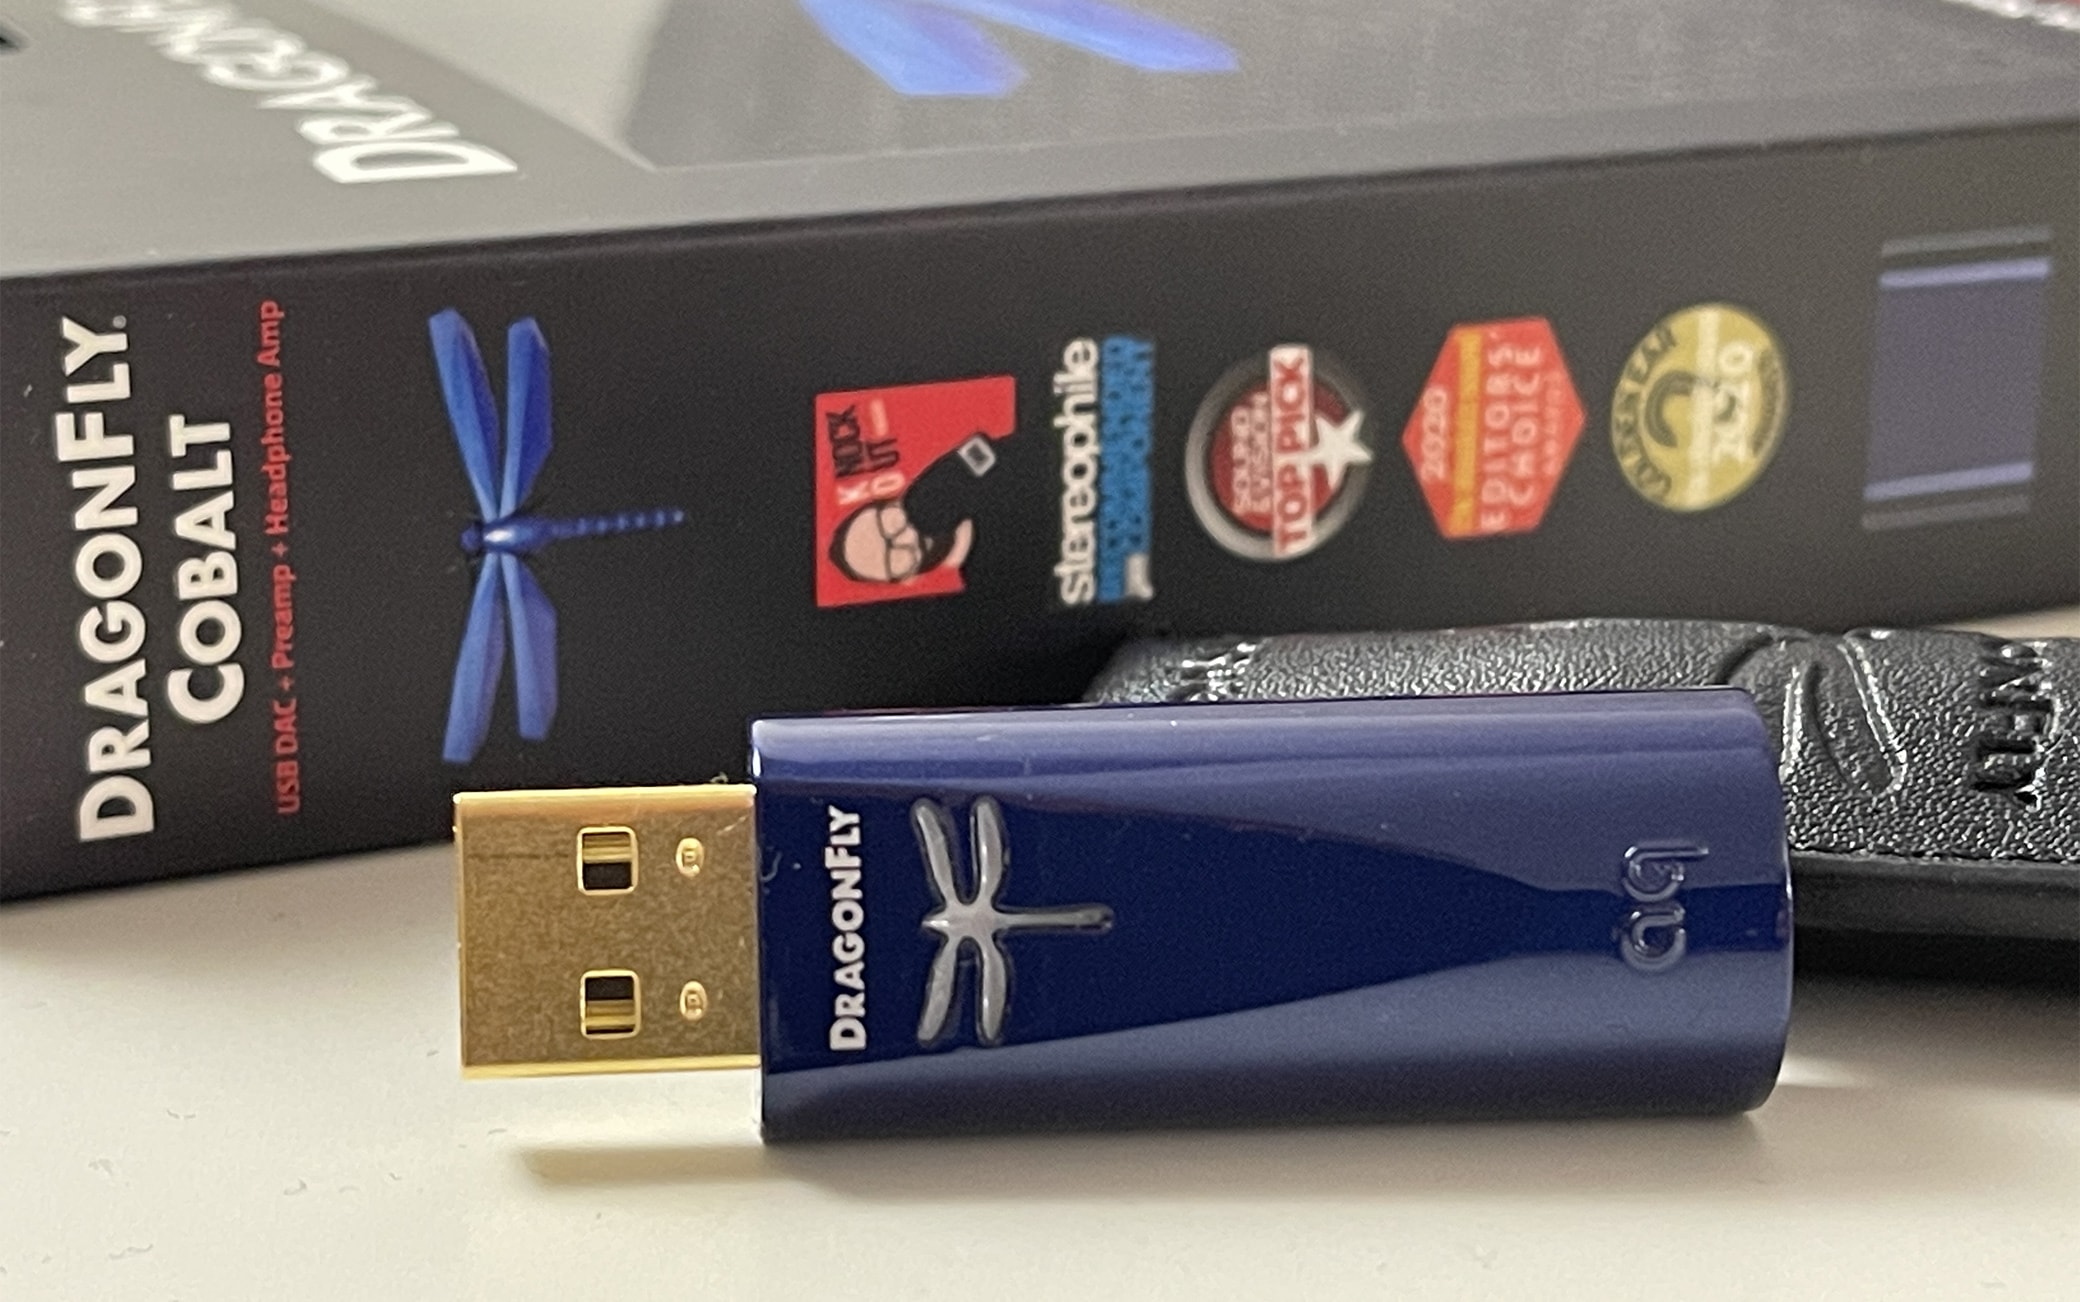 Top quality DACs and music – we tried Dragonfly Cobalt